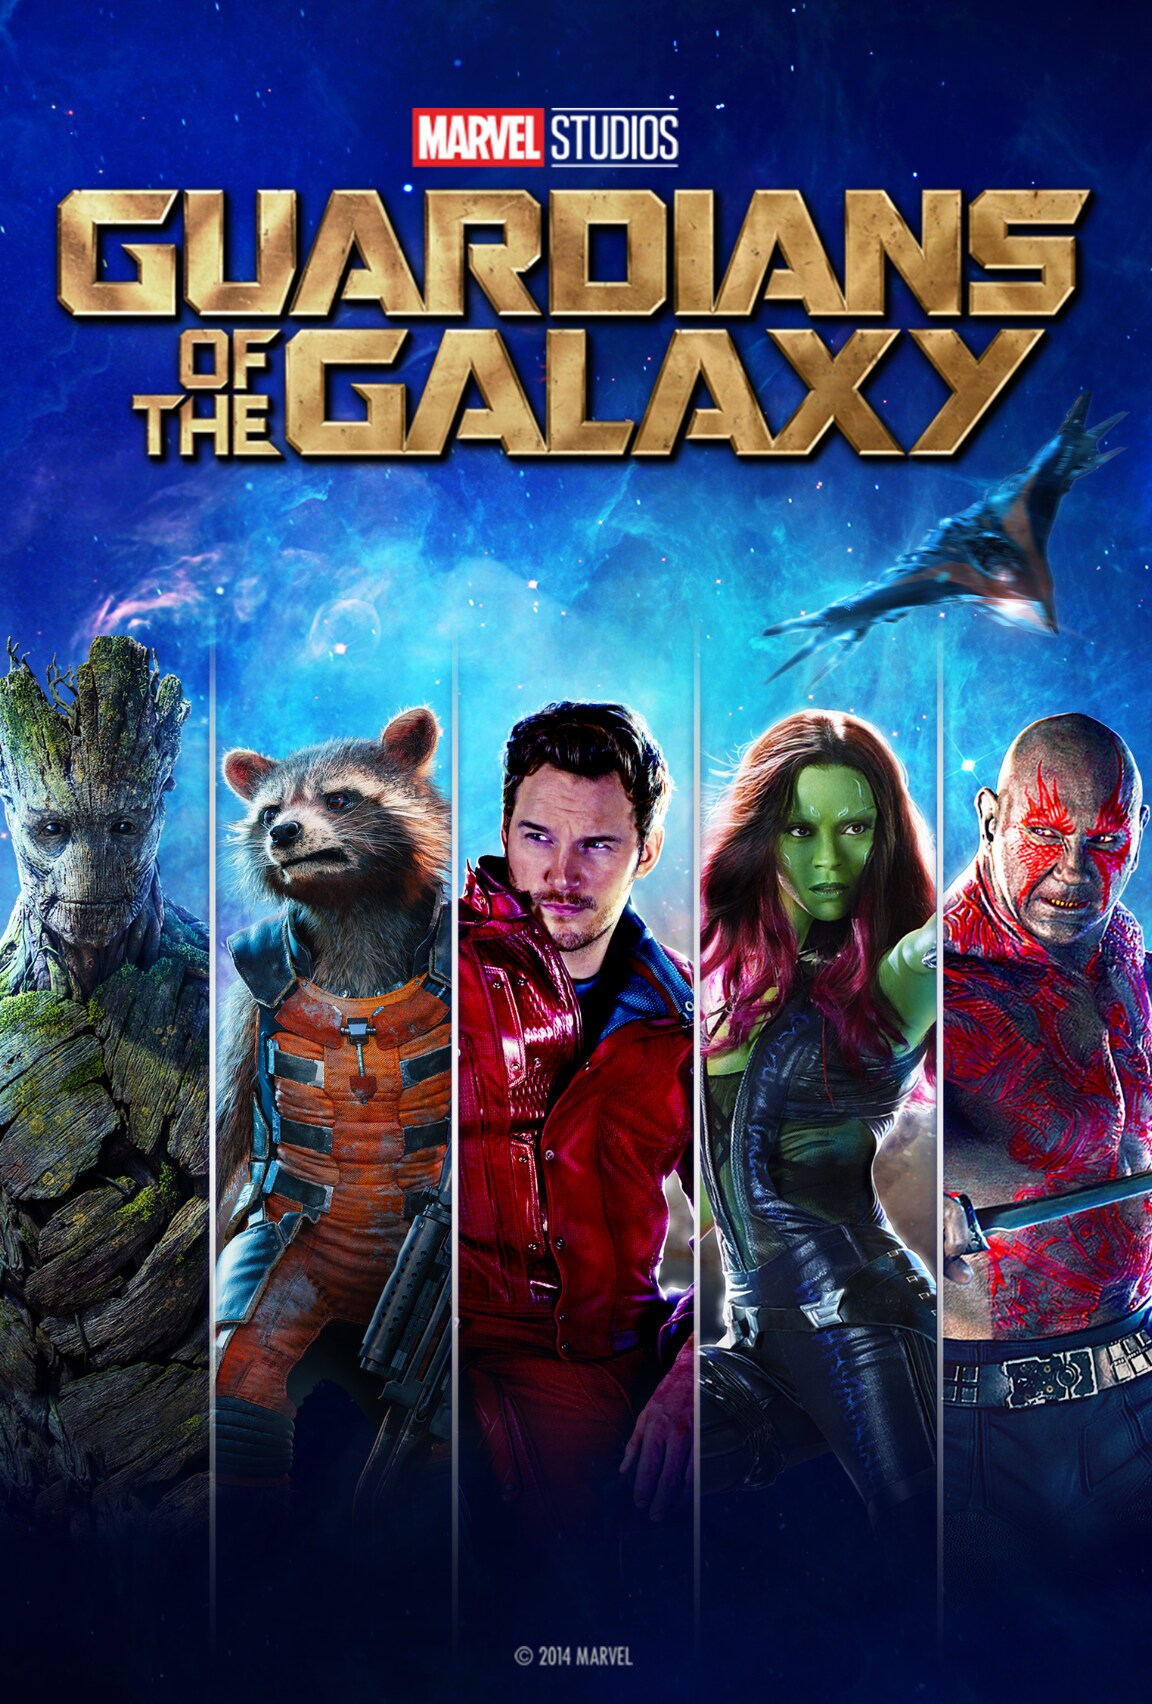 Guardians of the Galaxy on Disney Plus